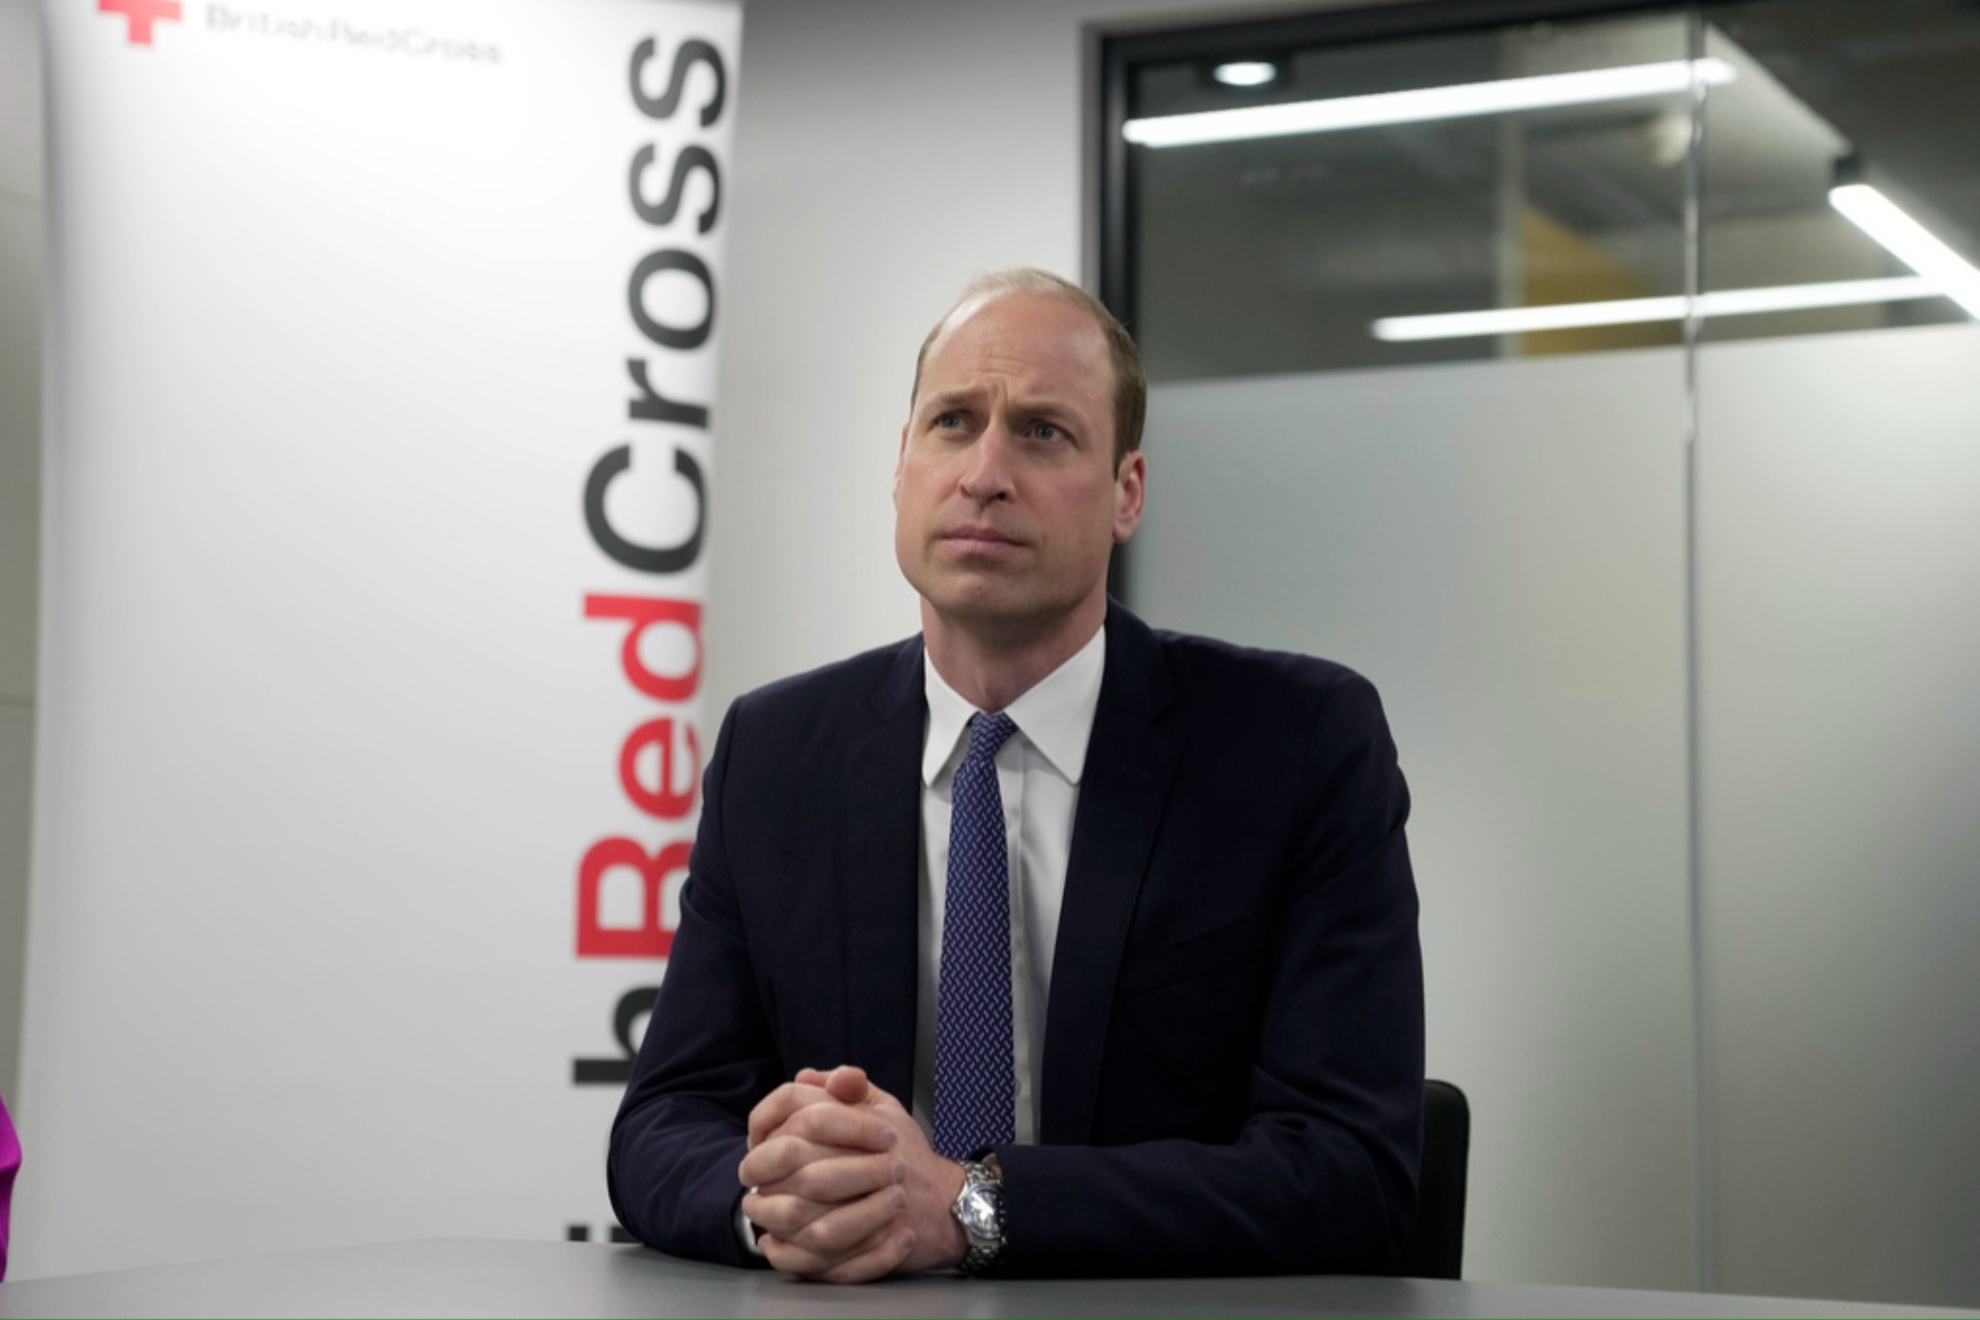 Prince William on a visit to the British Red Cross barracks in London.